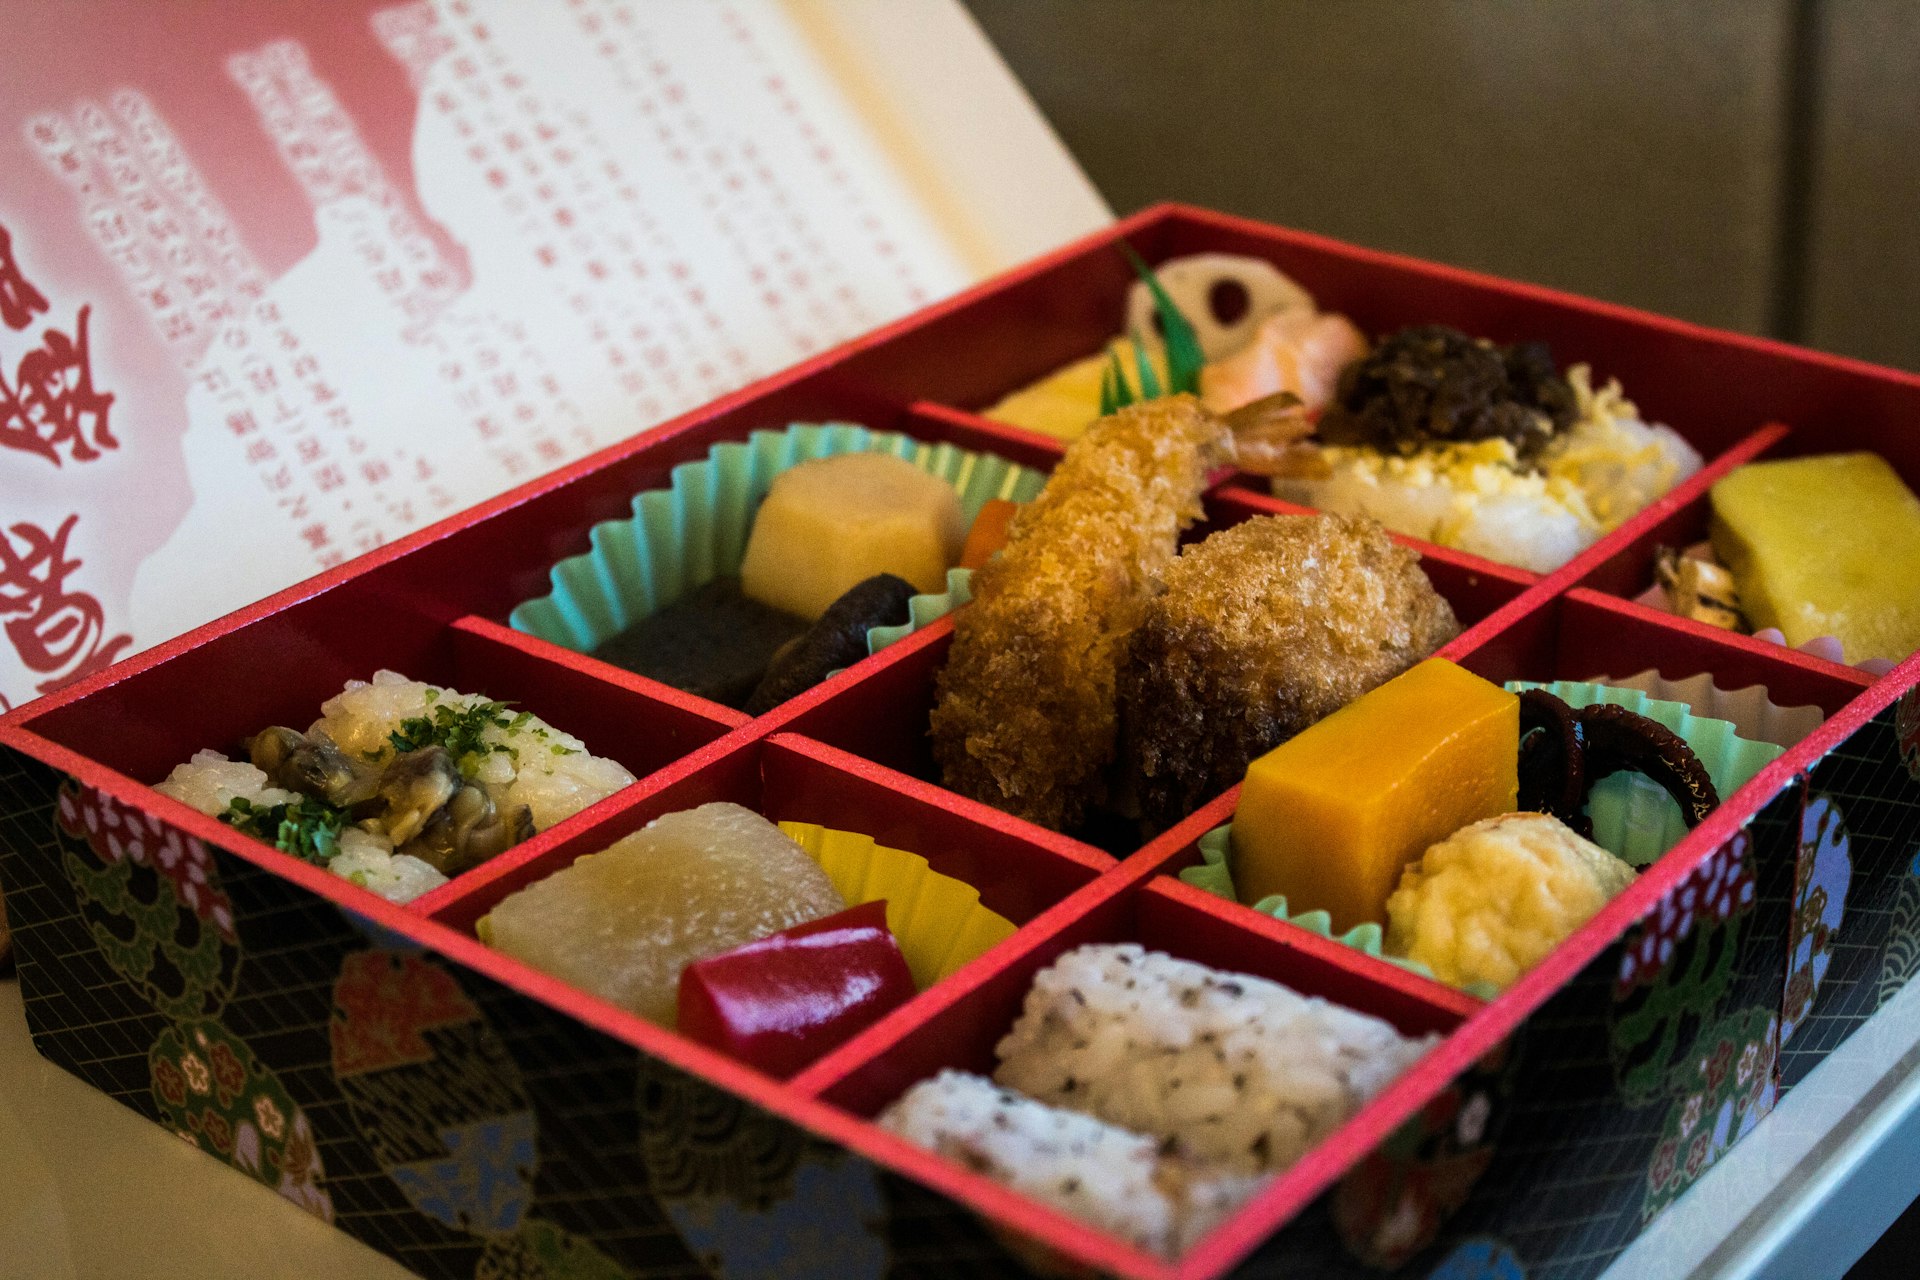 A beautifully presented box of food with each element separated into its own square